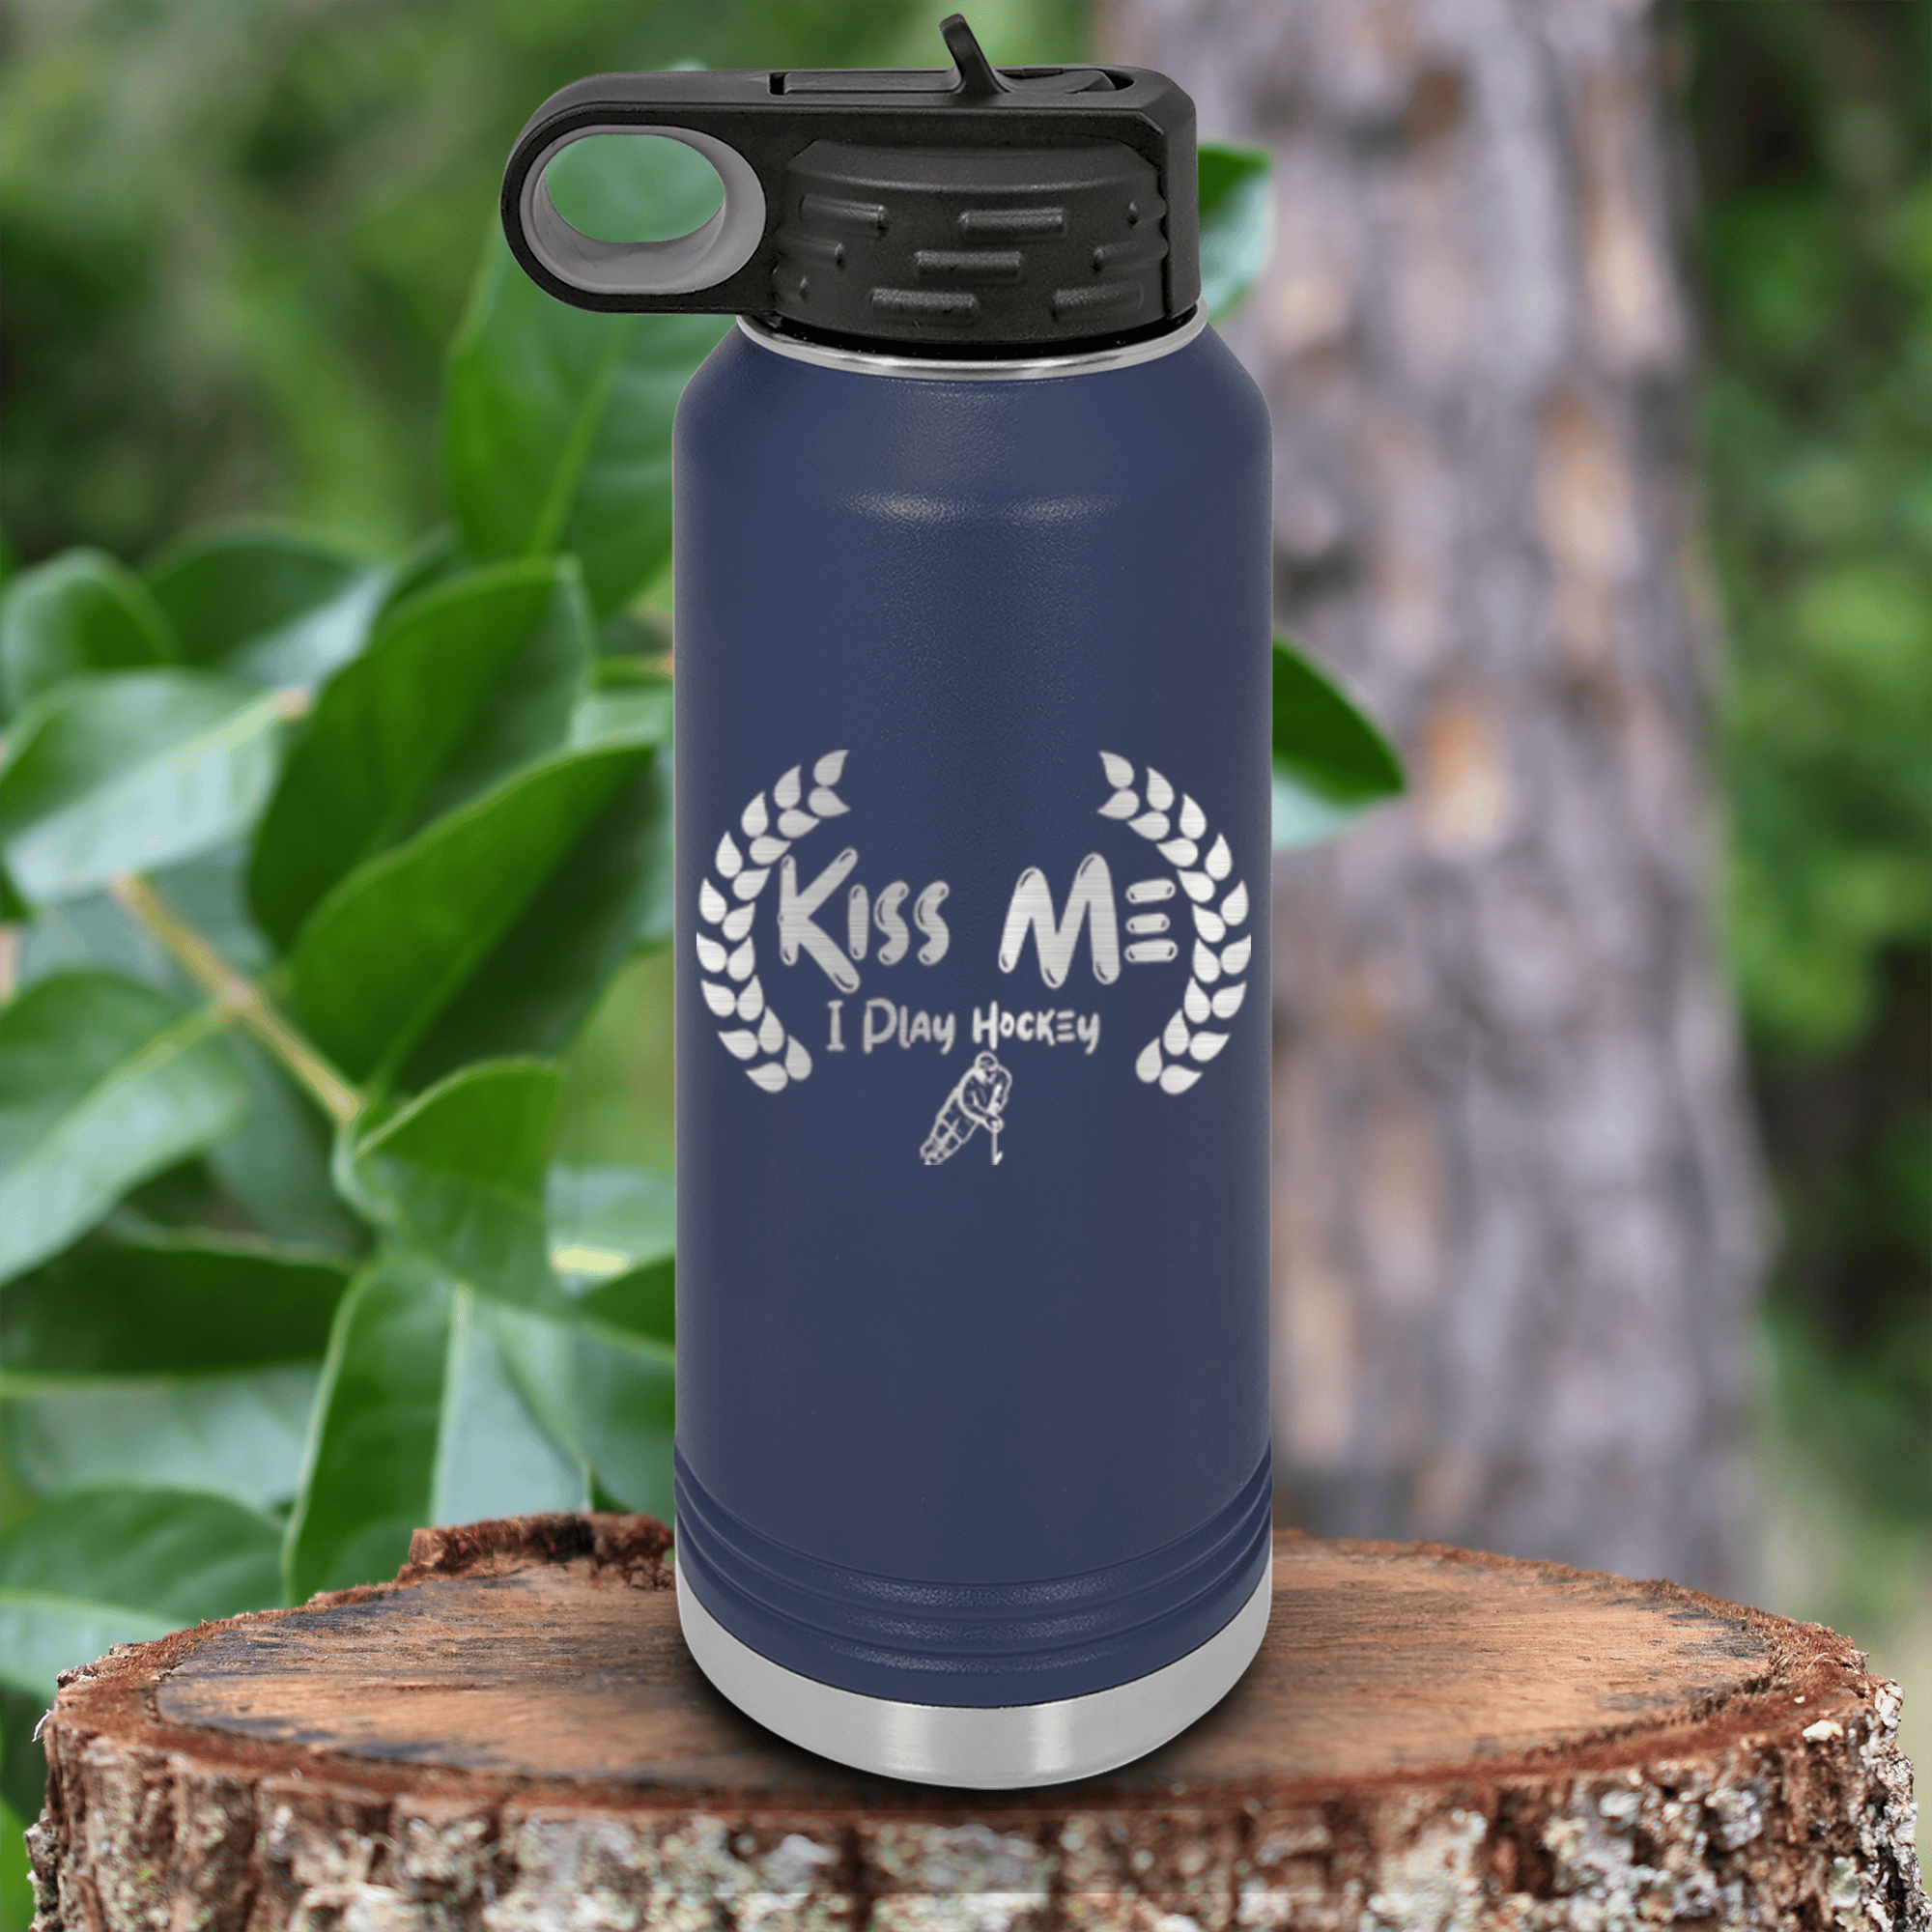 Navy Hockey Water Bottle With Chapped By Chasing Pucks Design